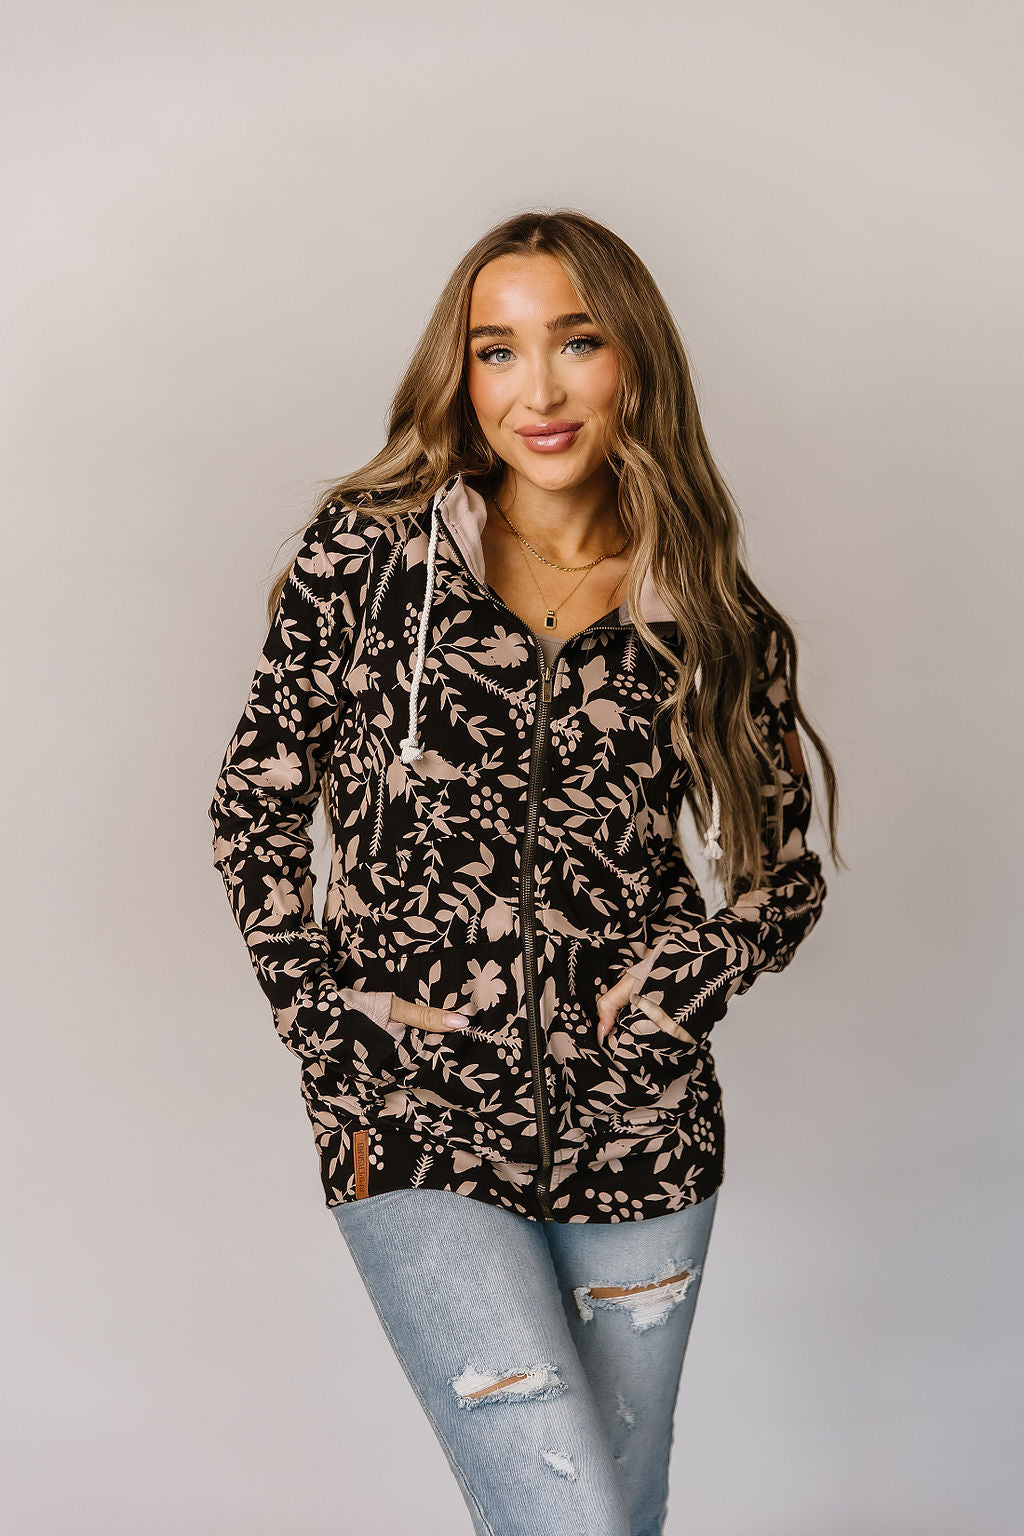 NEW ~ Ampersand Fullzip Enchanted ~ Black/Blush Floral~ Available in Curvy!